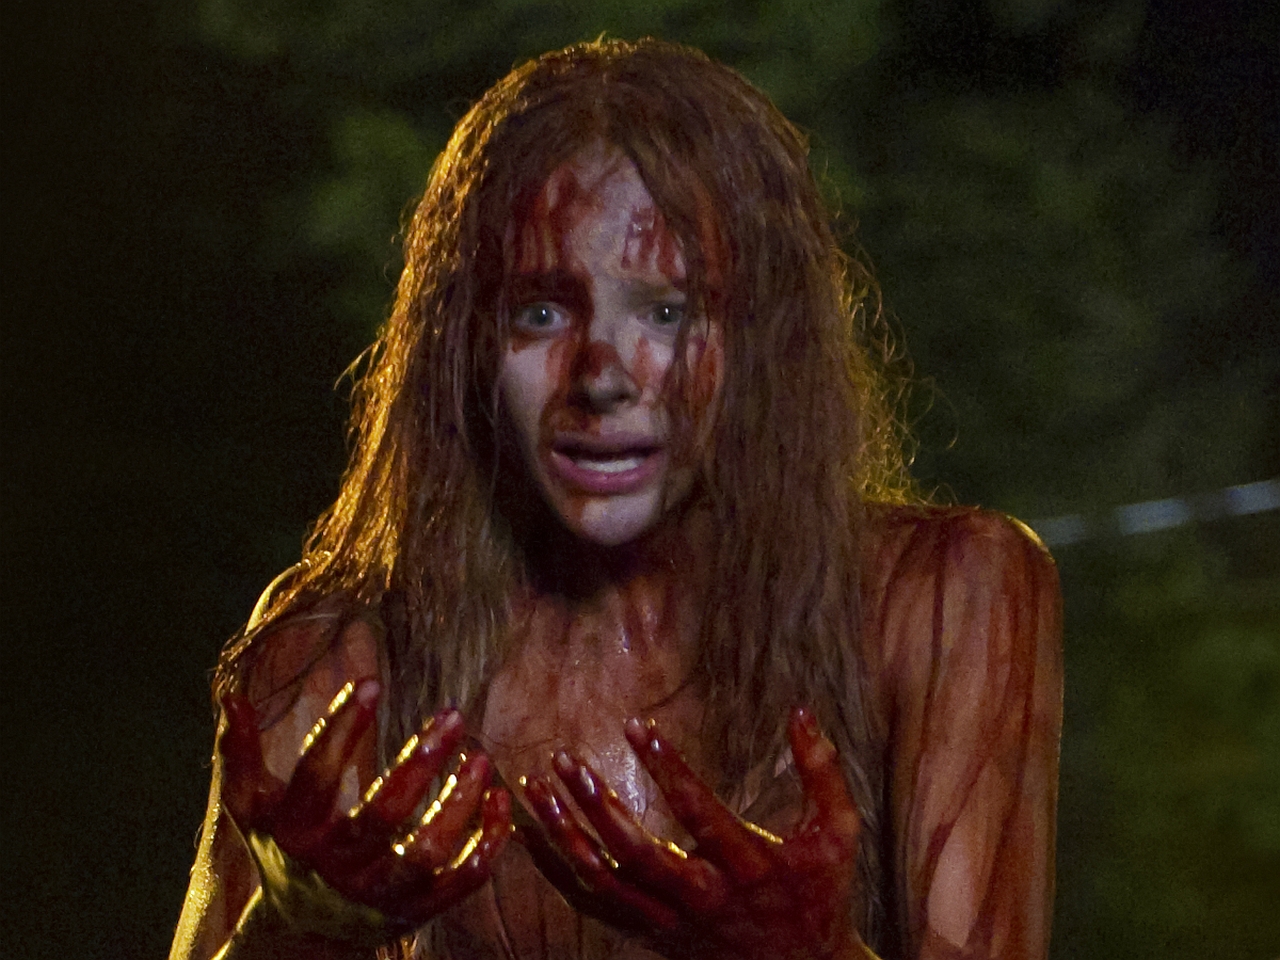 Carrie opens Friday.